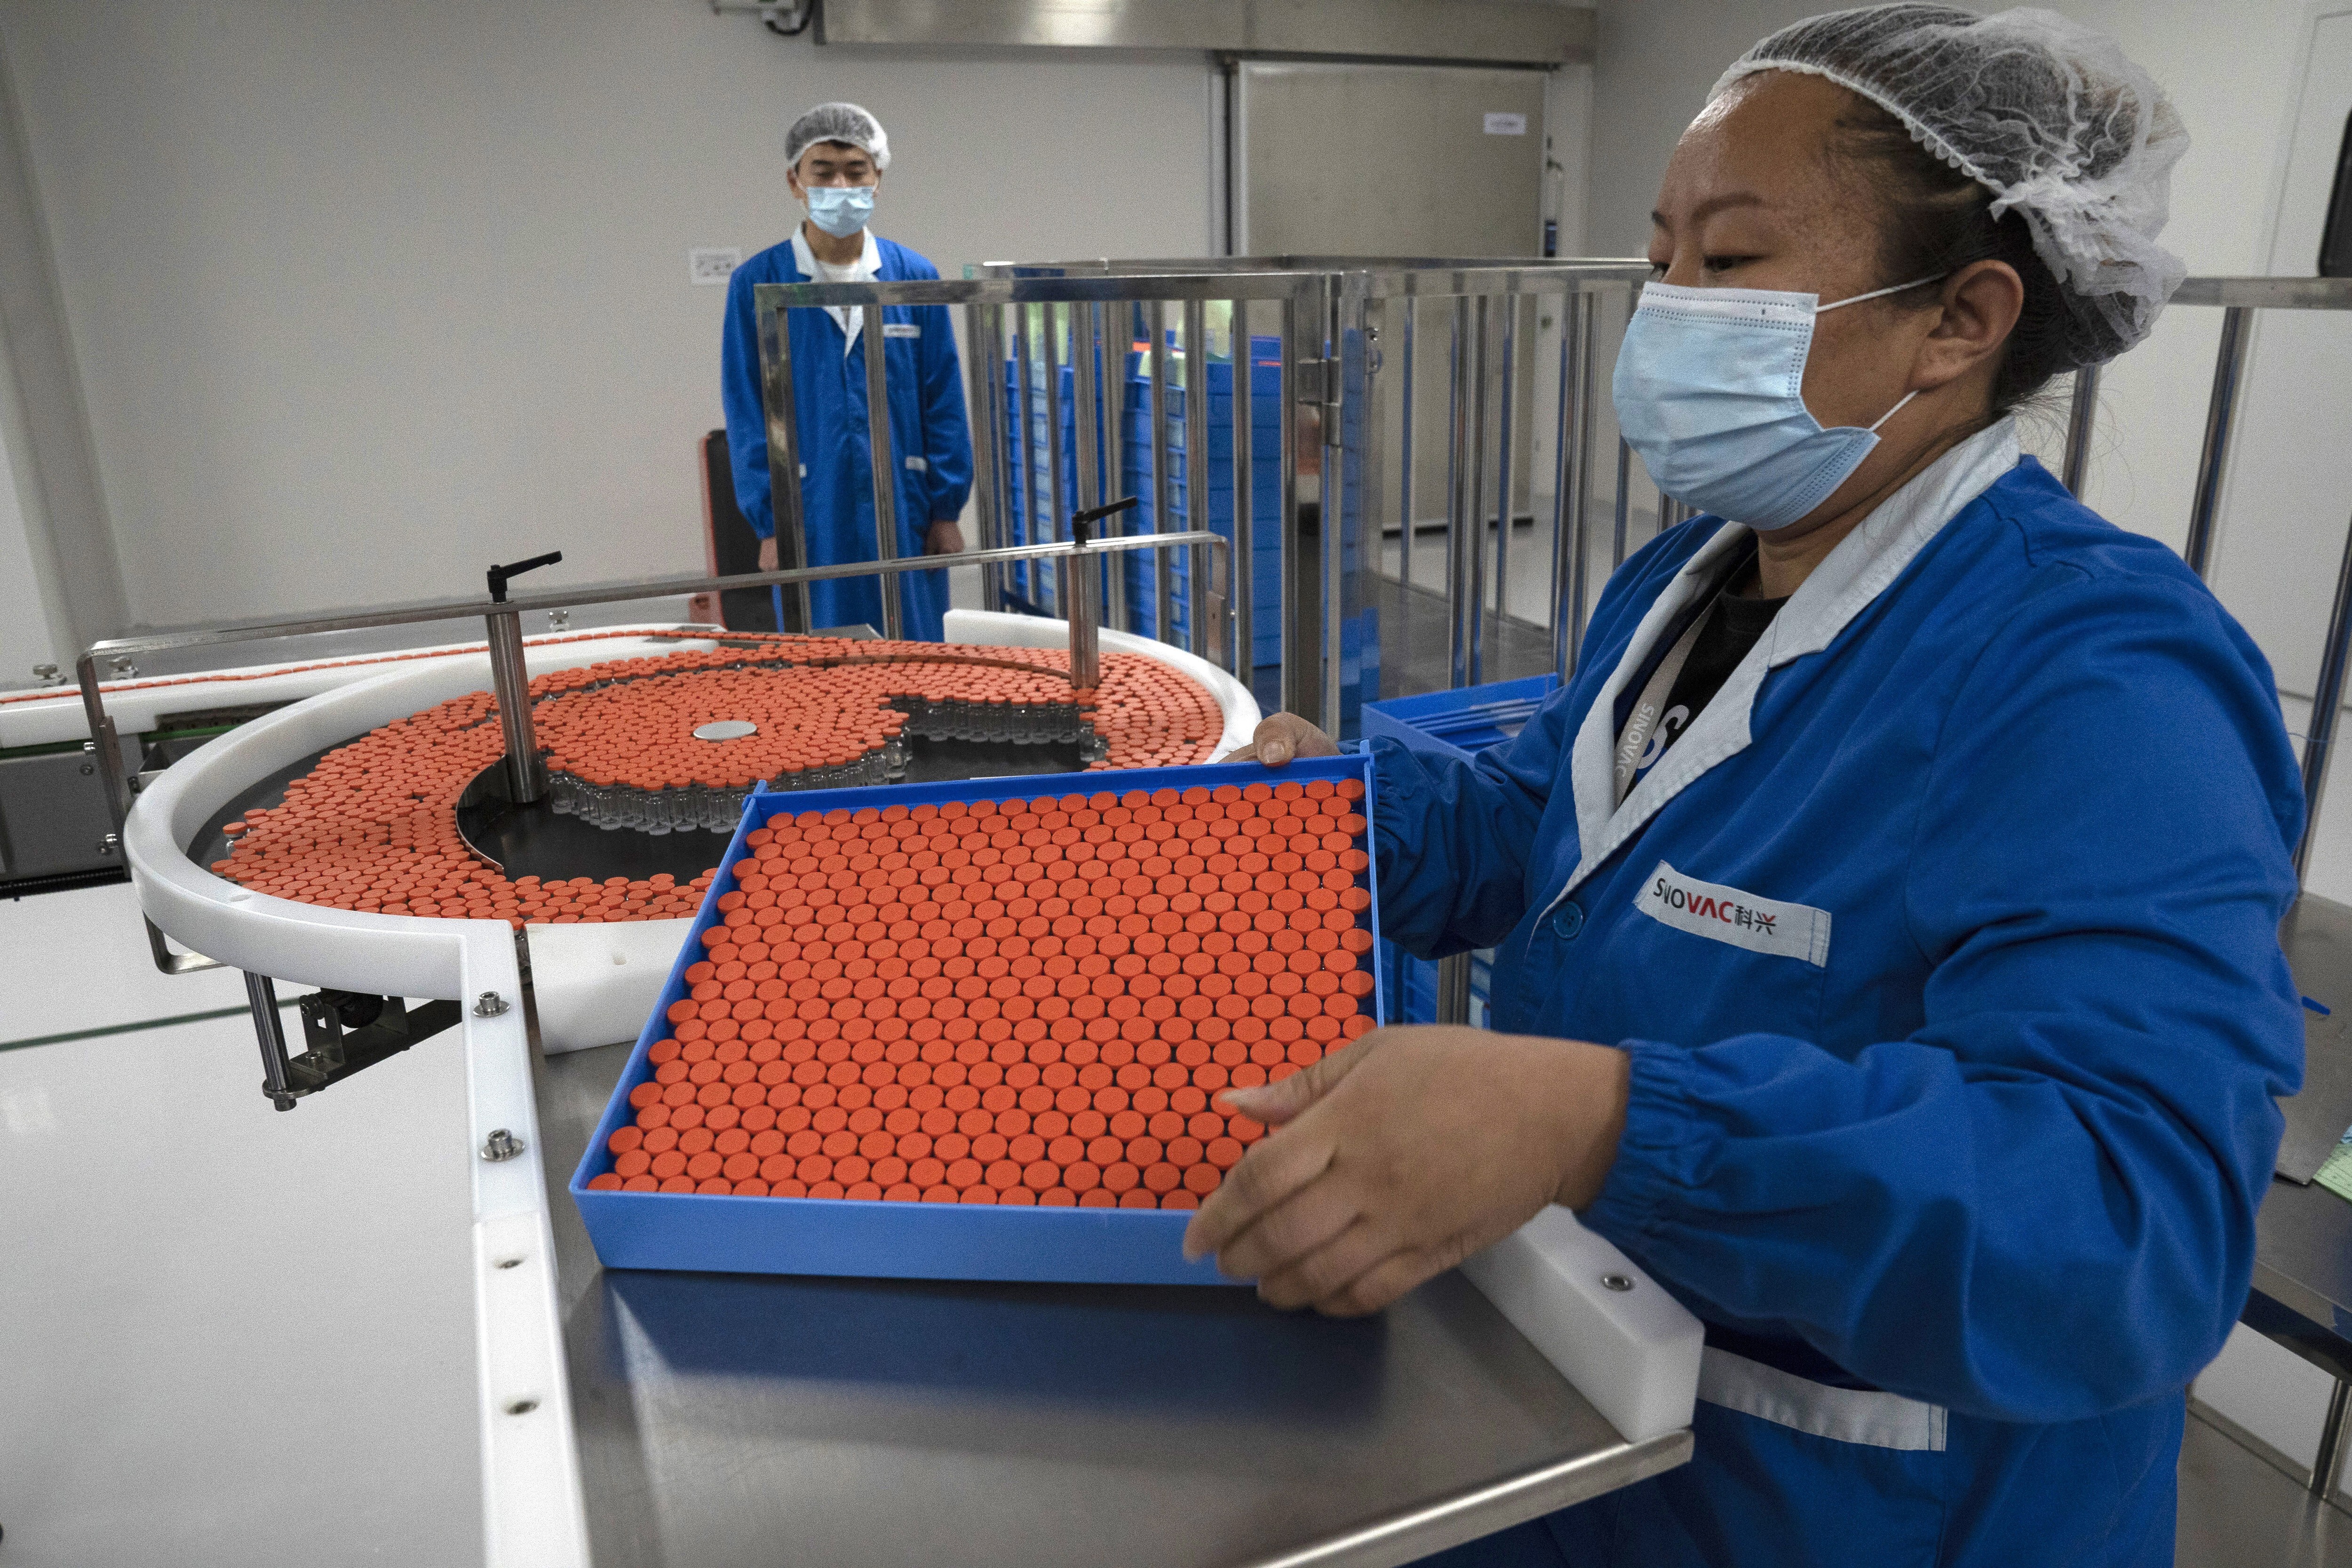 A Sinovac vaccine factory in Beijing. The company is among two providers that Hong Kong has tied up with for Covid-19 vaccines. The first million doses could be available as early as next month. Photo: AP